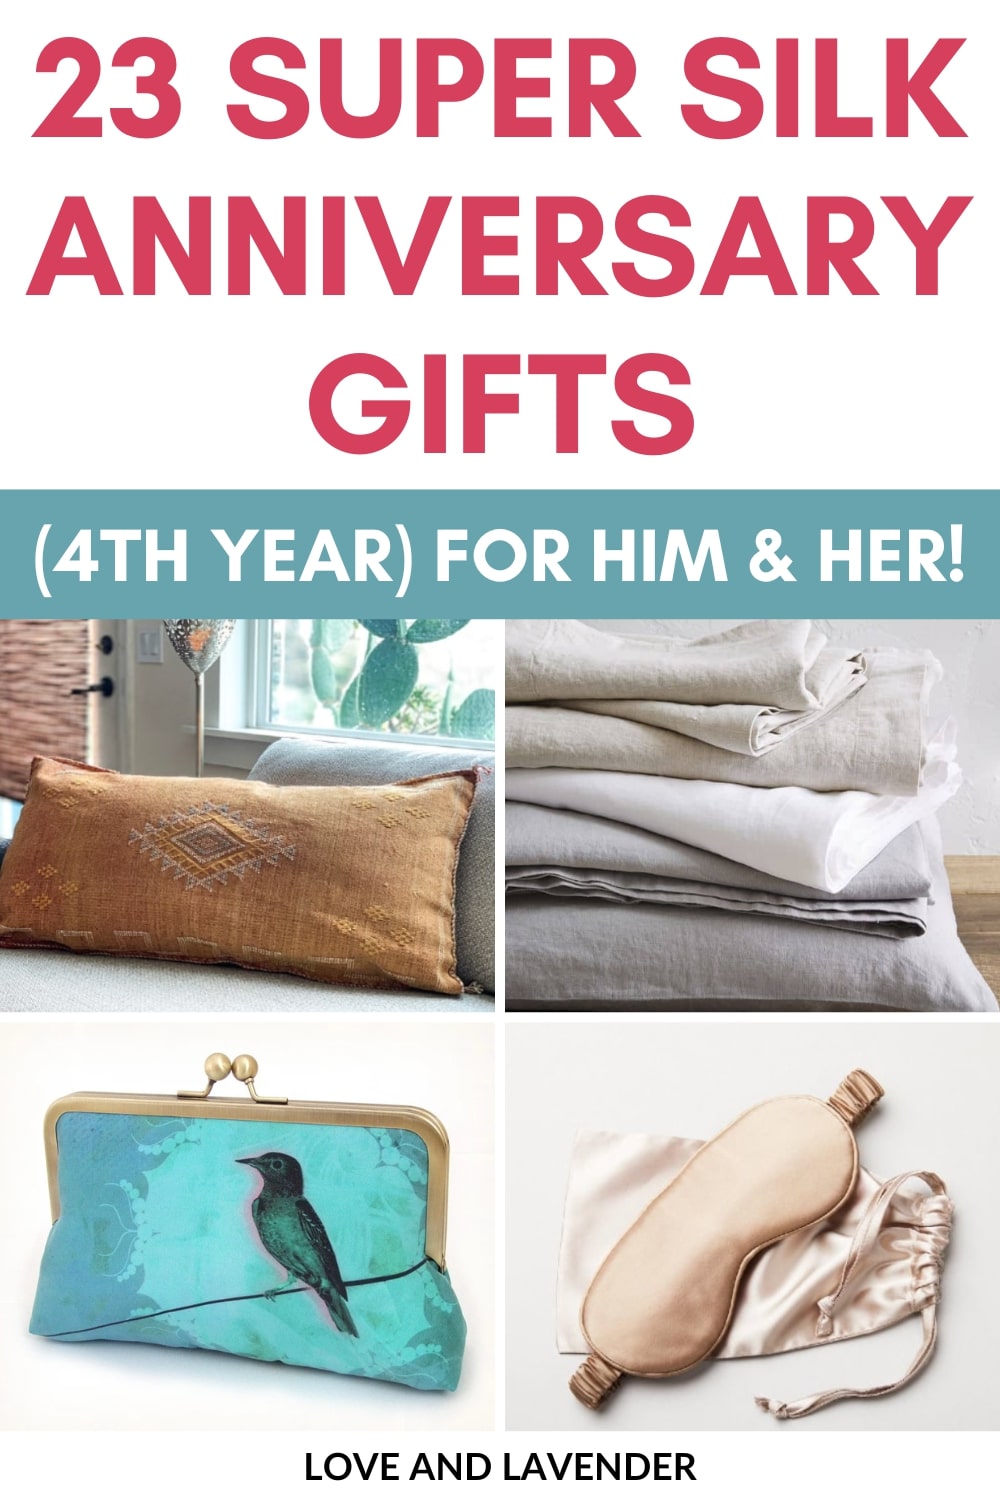 23 Super Silk Anniversary Gifts (4th Year) for Him & Her!